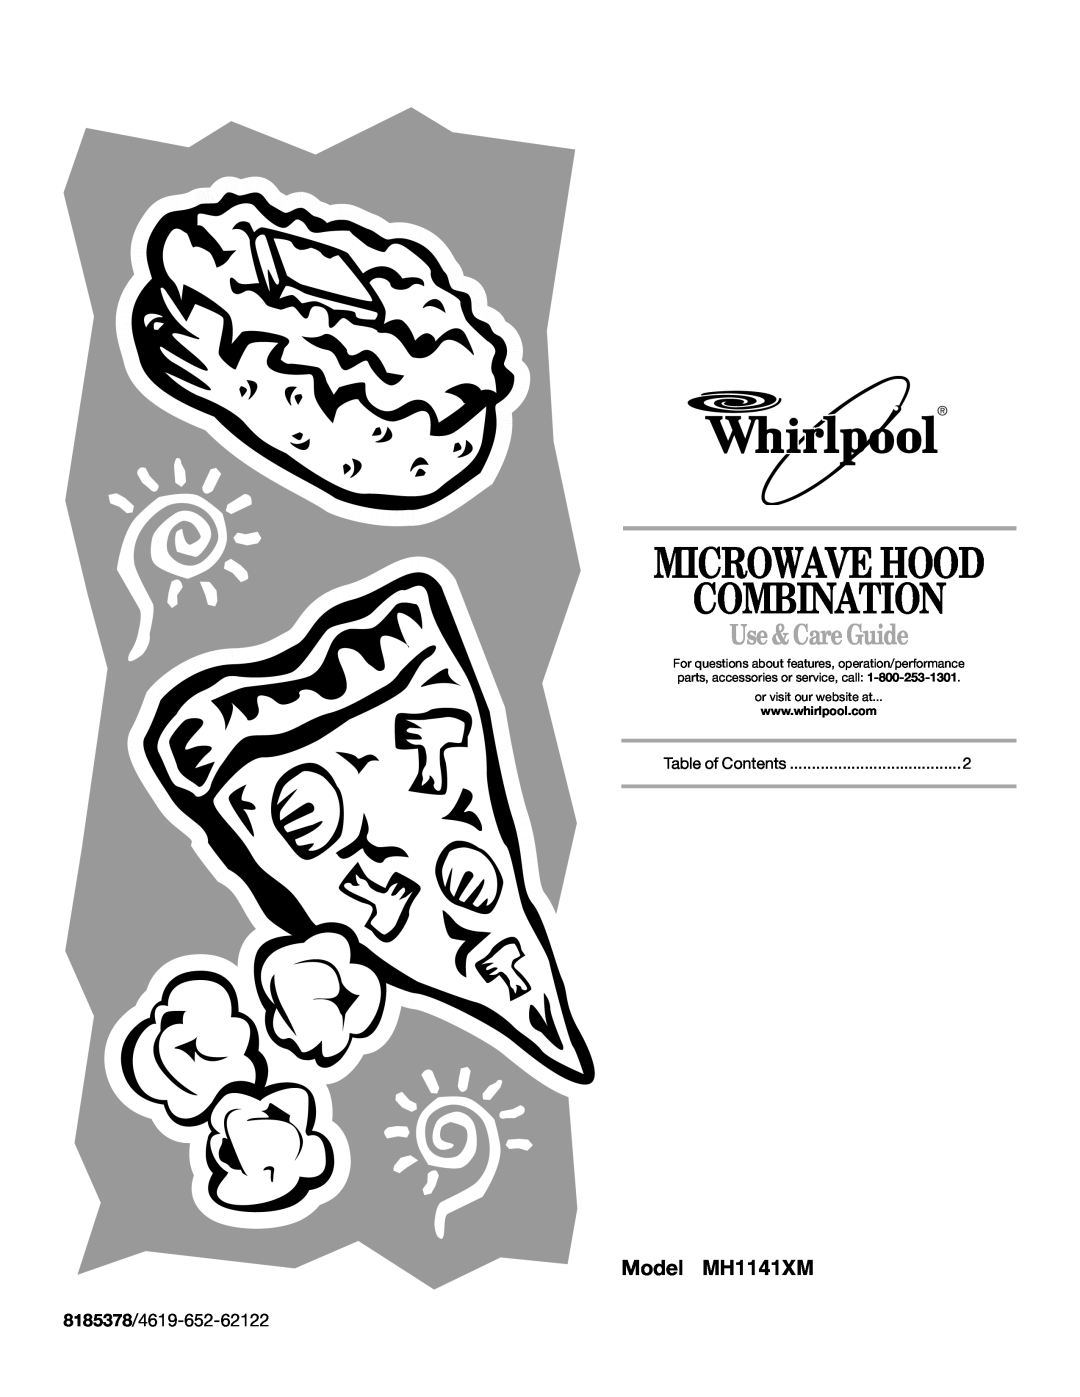 Whirlpool manual Microwave Hood Combination, Use & Care Guide, Model MH1141XM, 8185378/4619-652-62122 